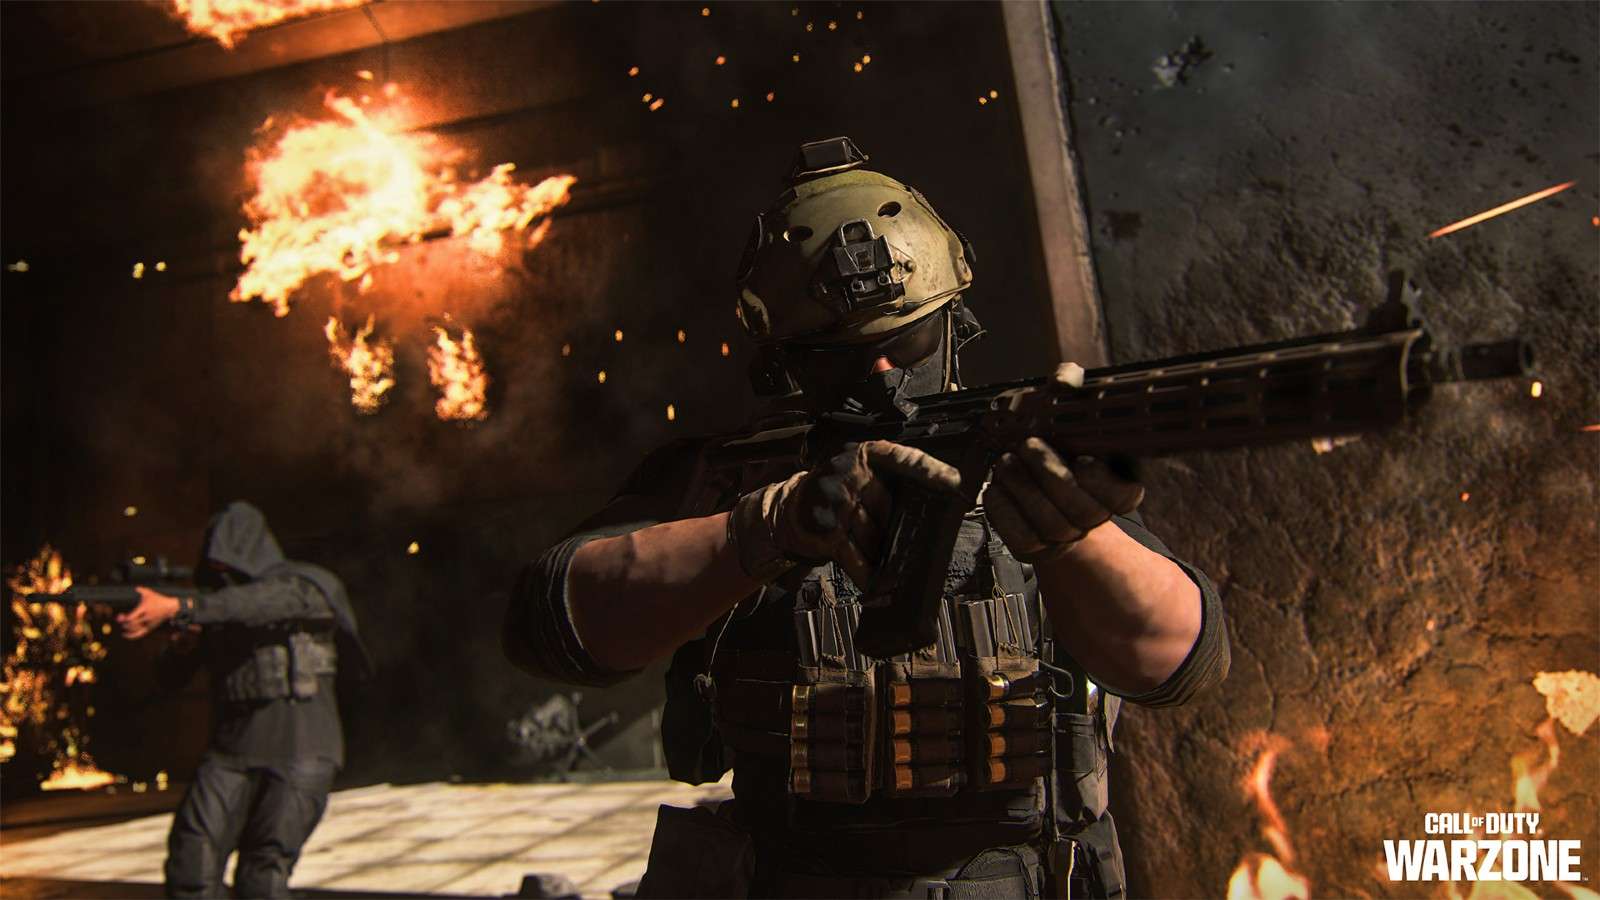 The M13C in Warzone 2.